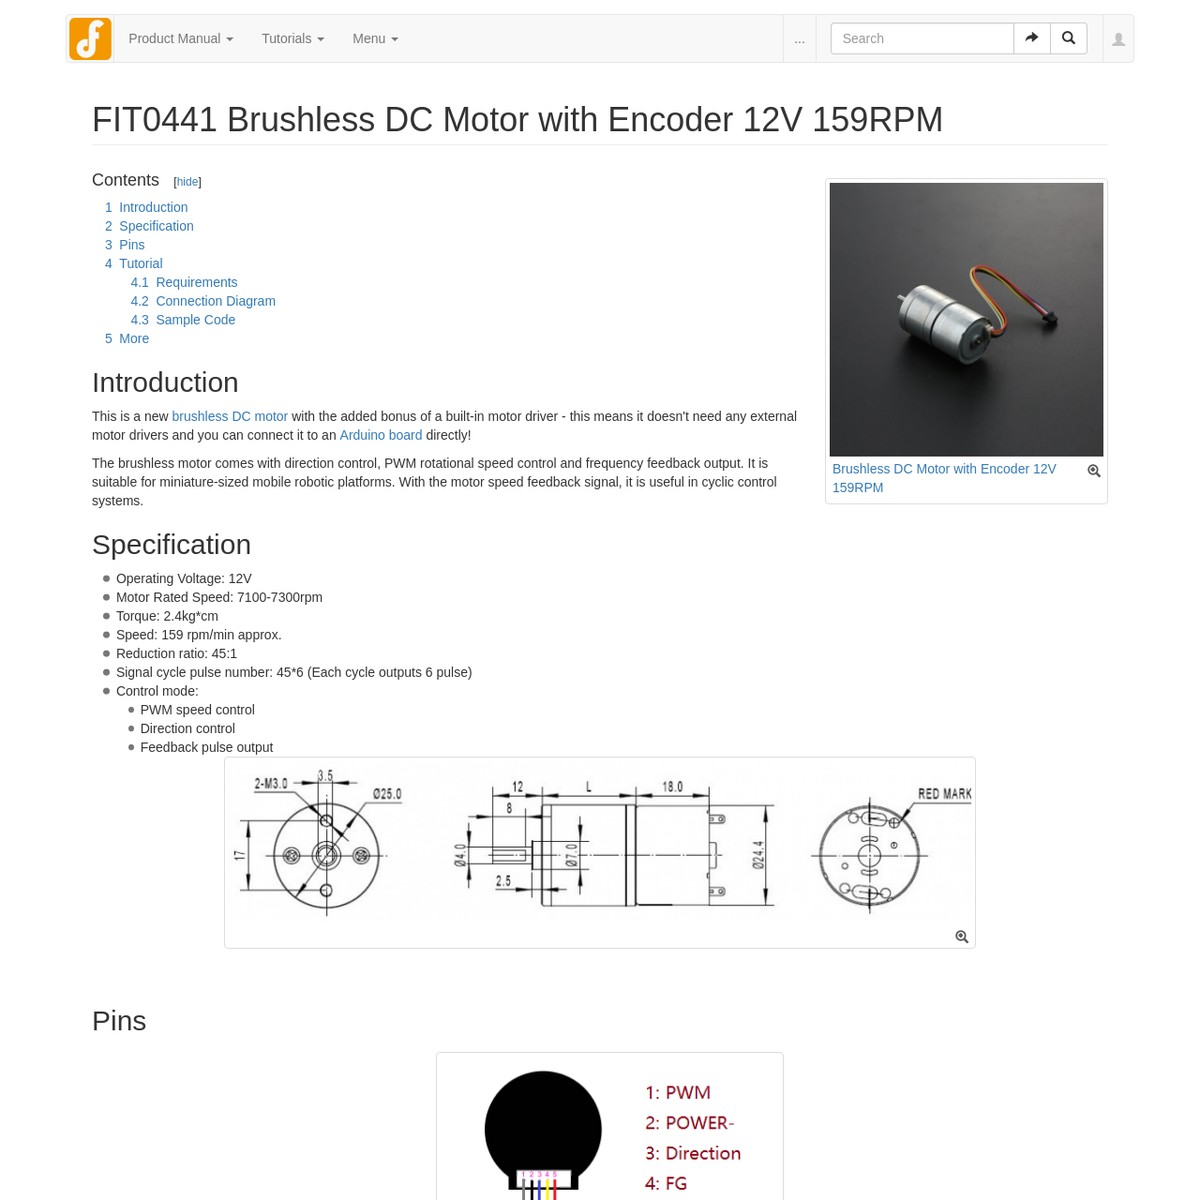 FIT0441 Brushless DC Motor with Encoder 12V 159RPM - DFRobot Electronic  Product Wiki and Tutorial: Arduino and Robot Wiki-DFRobot.com —